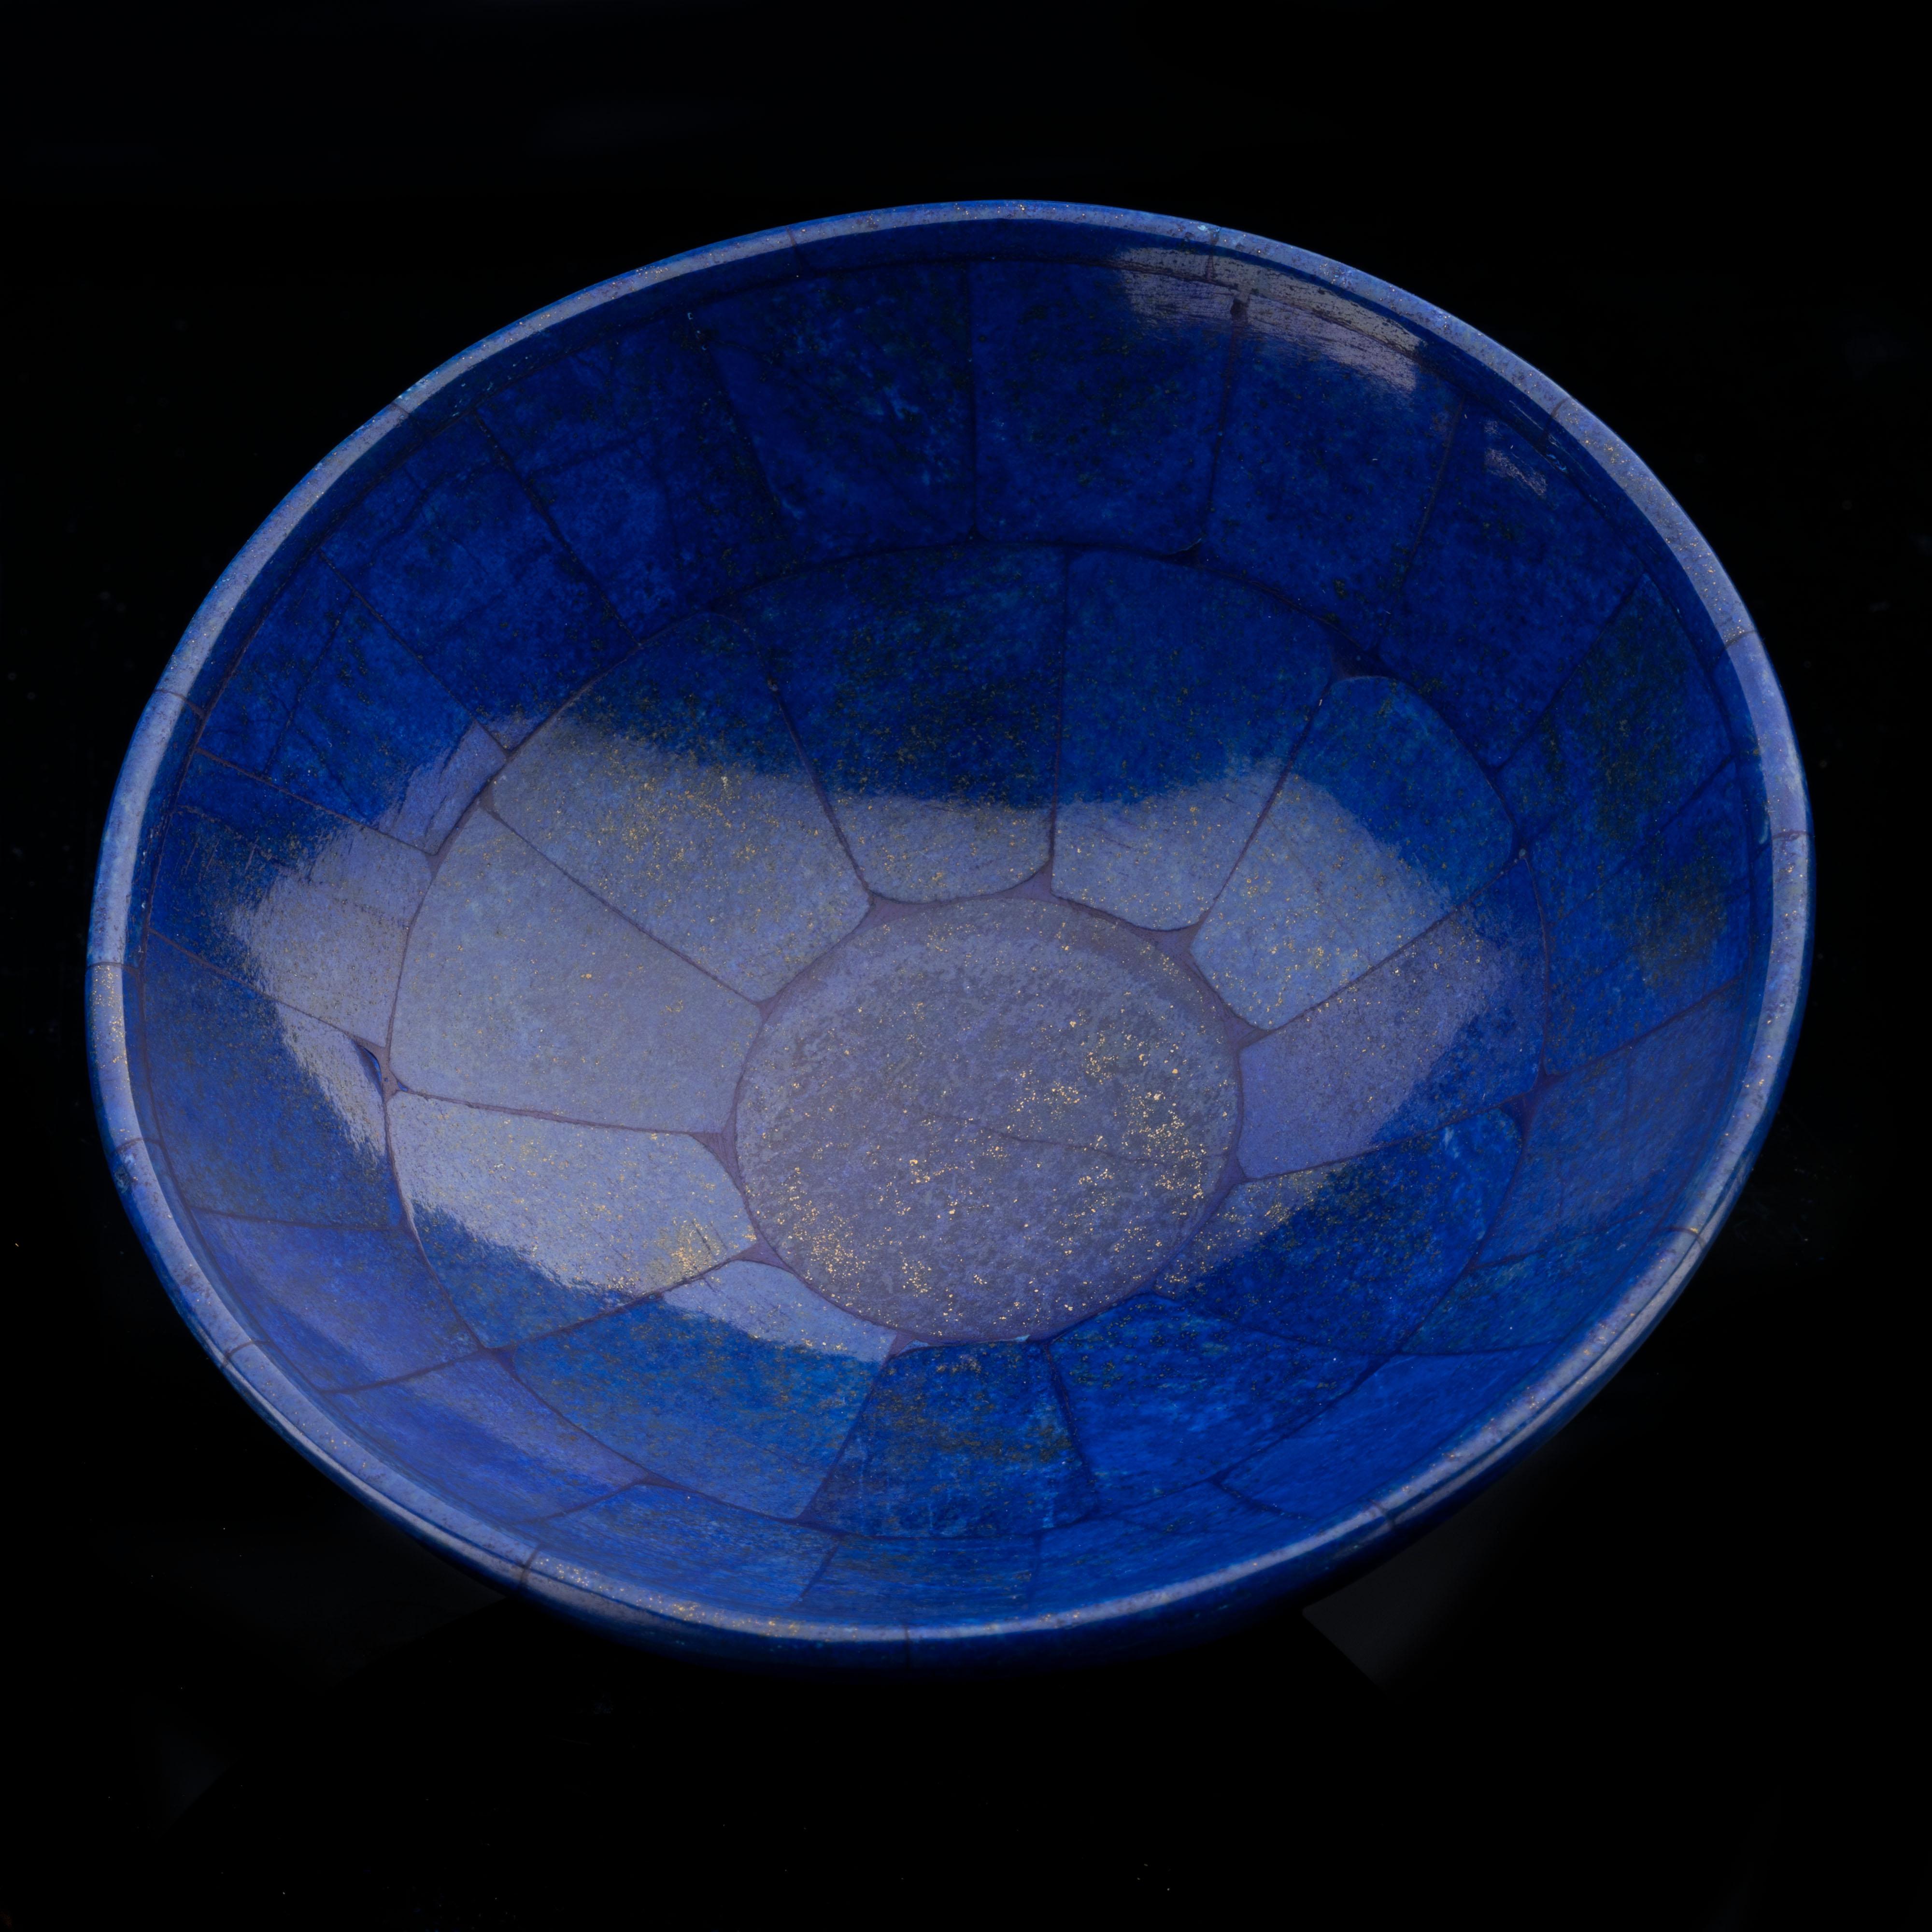 This standout home décor piece made from genuine high quality lapis lazuli has been hand-cut, hand-assembled, and hand-polished into a beautiful bowl. This handcrafted specimen displays a luxurious blue hue set off by the entrancing golden shimmer